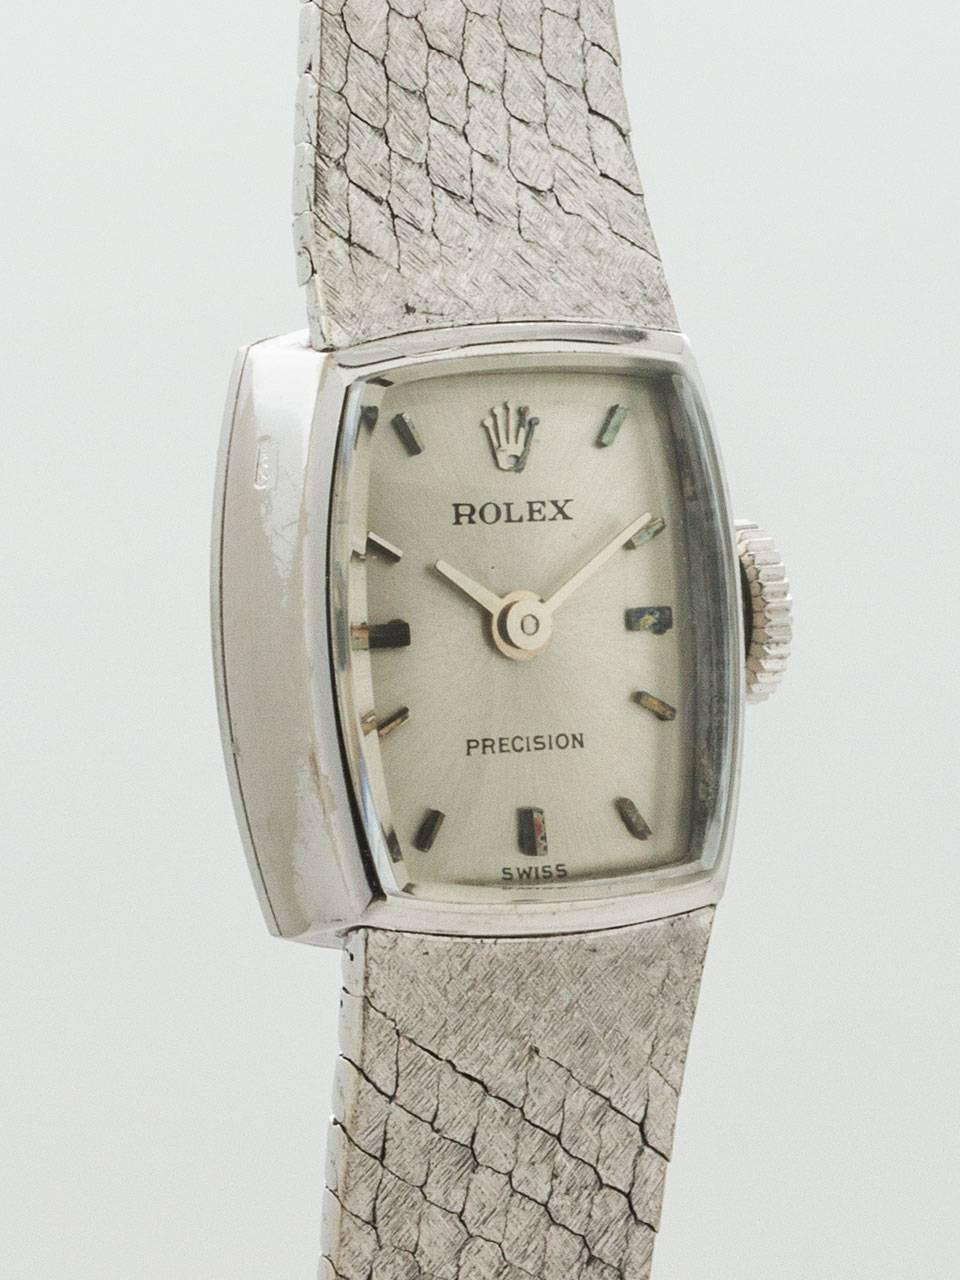 Vintage Lady's Rolex 18K White Gold Bracelet Wristwatch circa 1960s. Petite tonneau shaped case with integral heavy mesh white gold bracelet with fold over clasp. Featuring original silvered satin dial with applied silver indexes and silver tapered